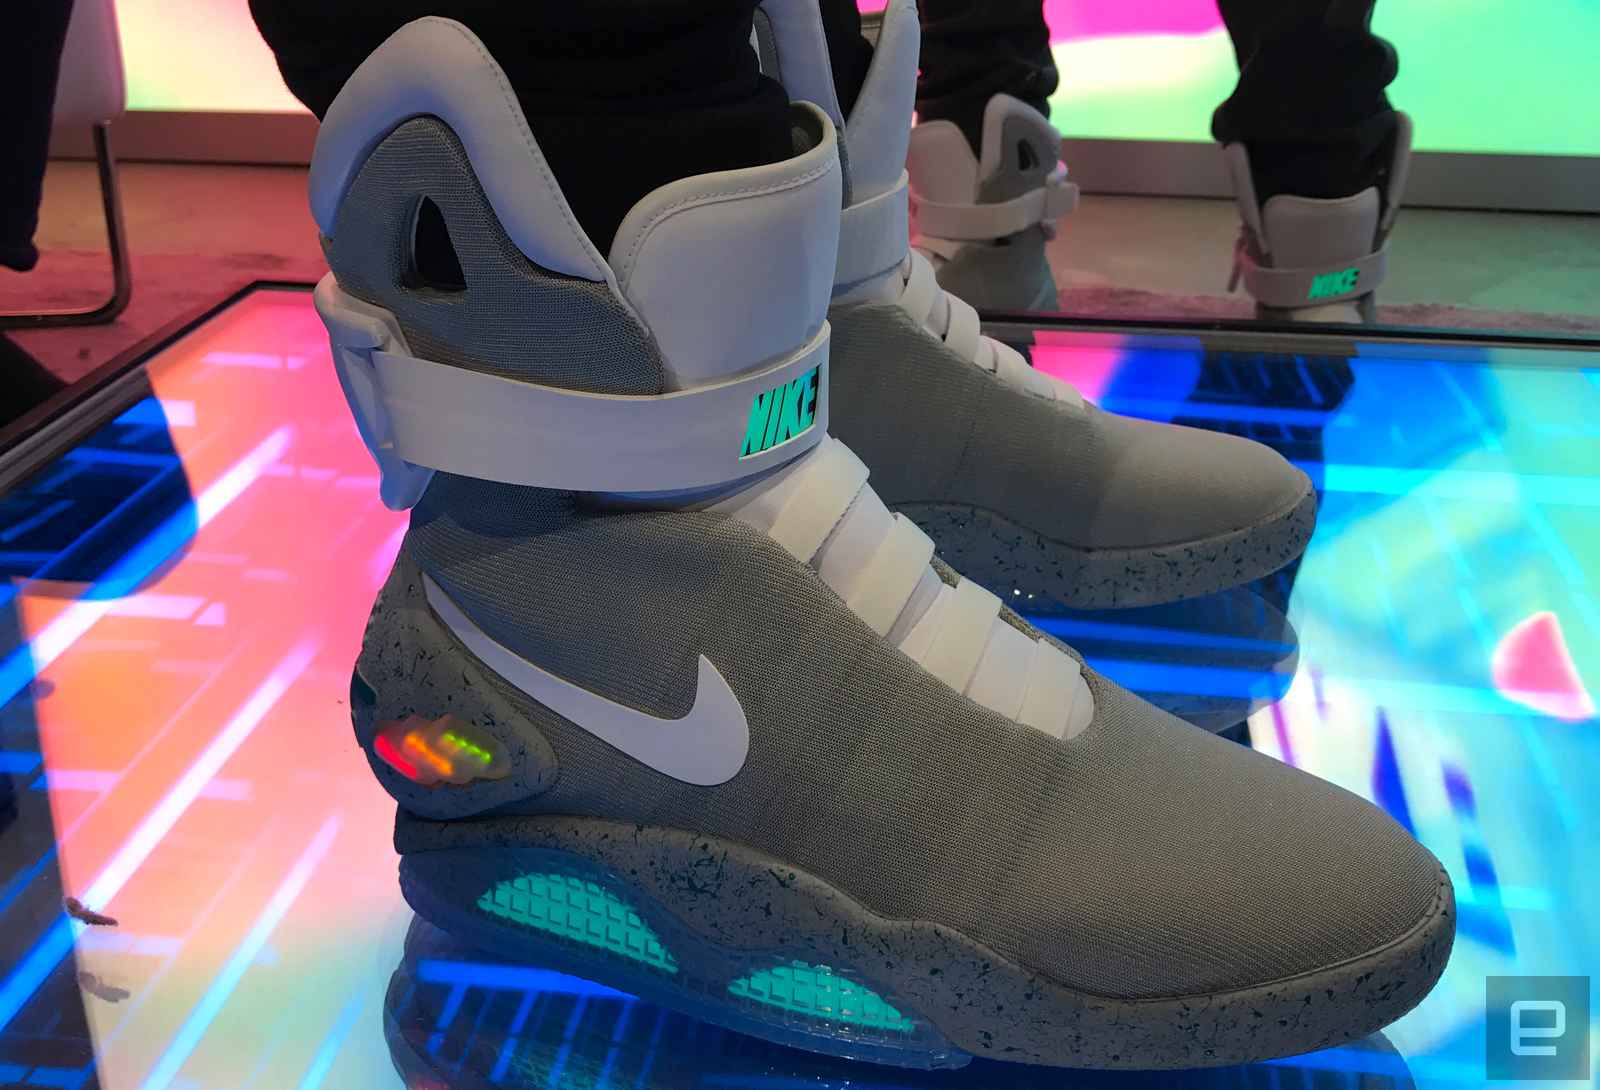 Larry Belmont oscuro Perder Nike's self-lacing Mags are hot, won't catch fire | Engadget